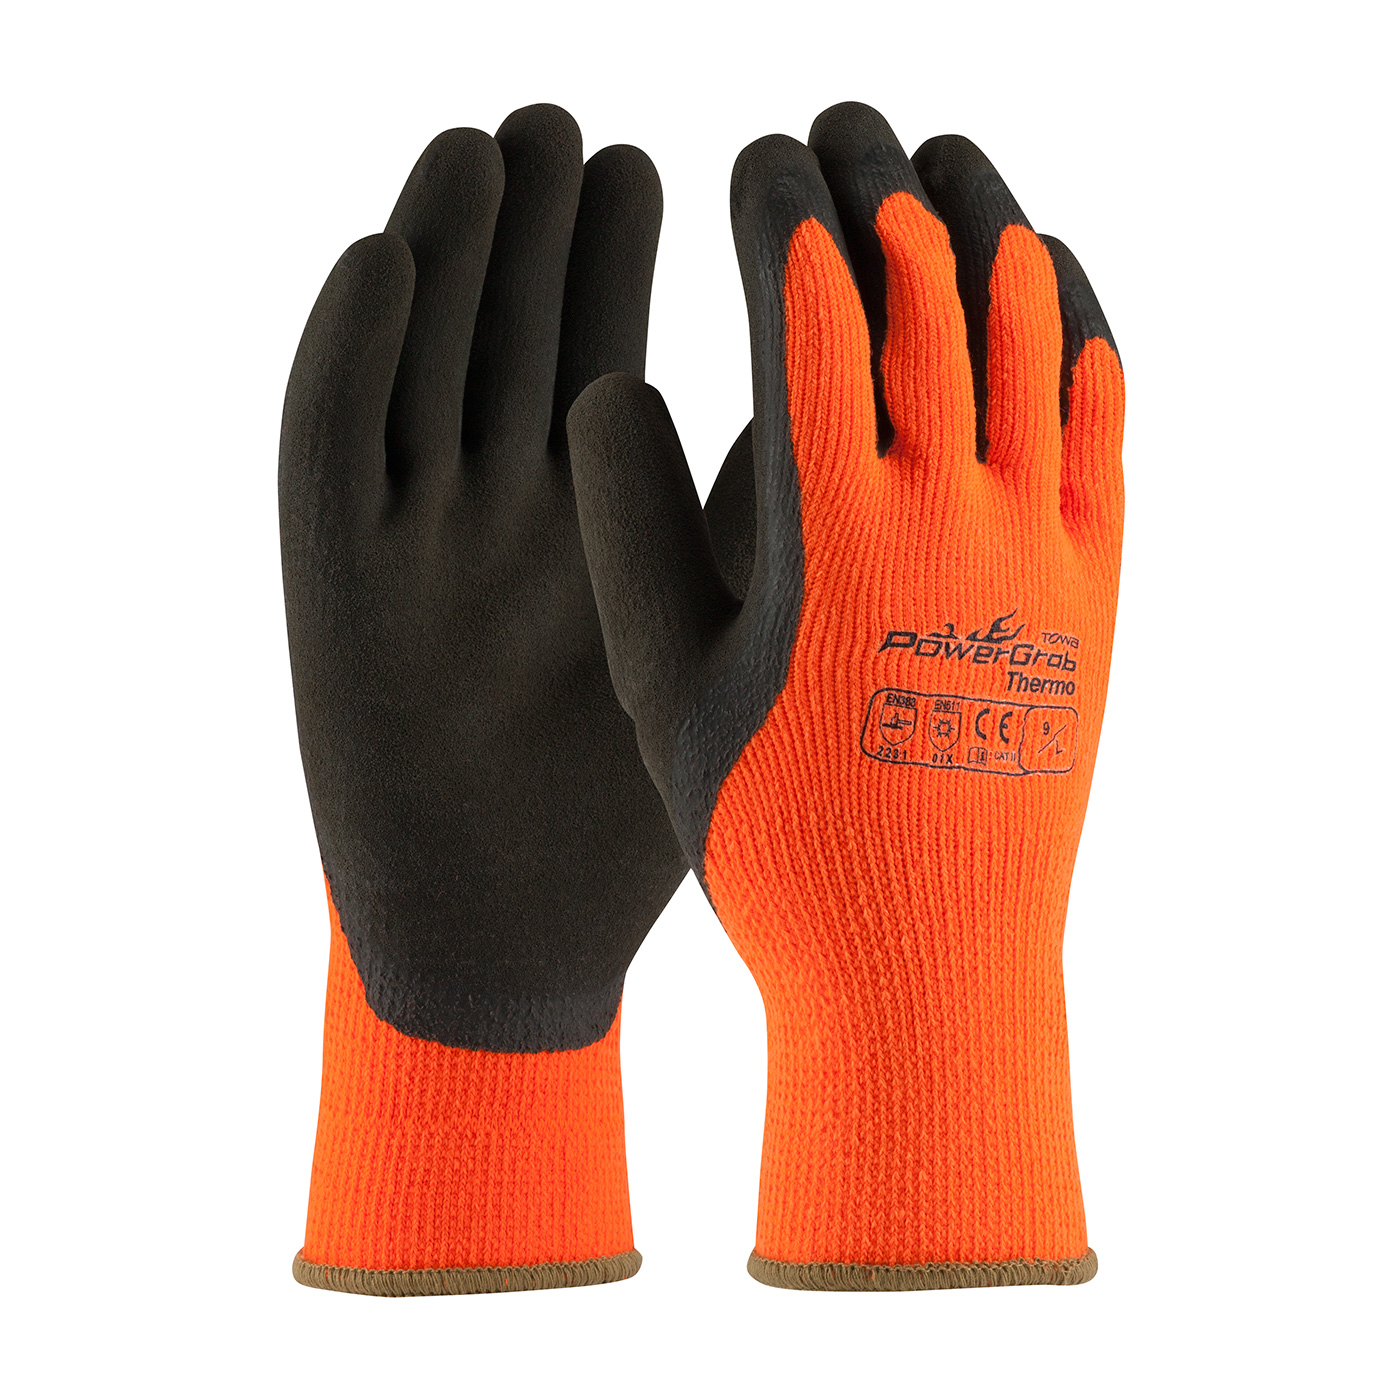 PIP 41-1400/M PowerGrab Thermo Hi-Vis Seamless Knit Acrylic Terry Glove with Latex MicroFinish Grip on Palm & Fingers - Medium PID-41 1400 M